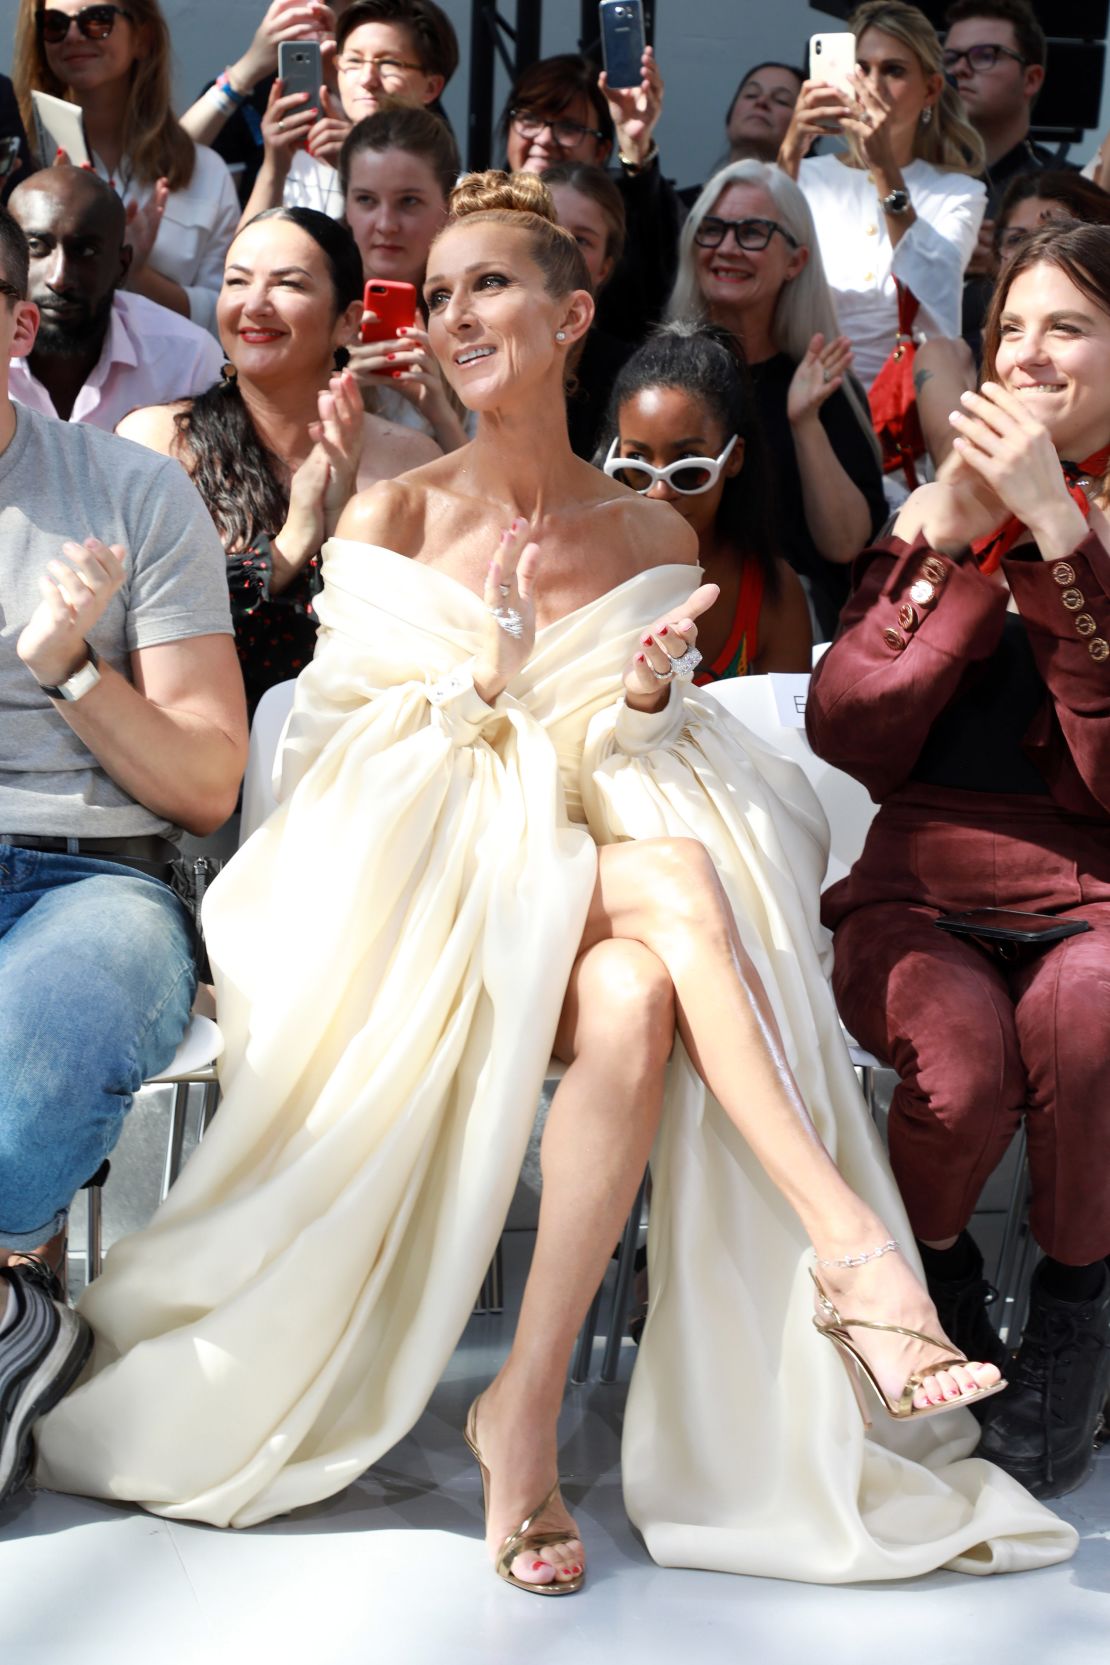 The 5 Best Dressed From the Front Row at Chanel Couture